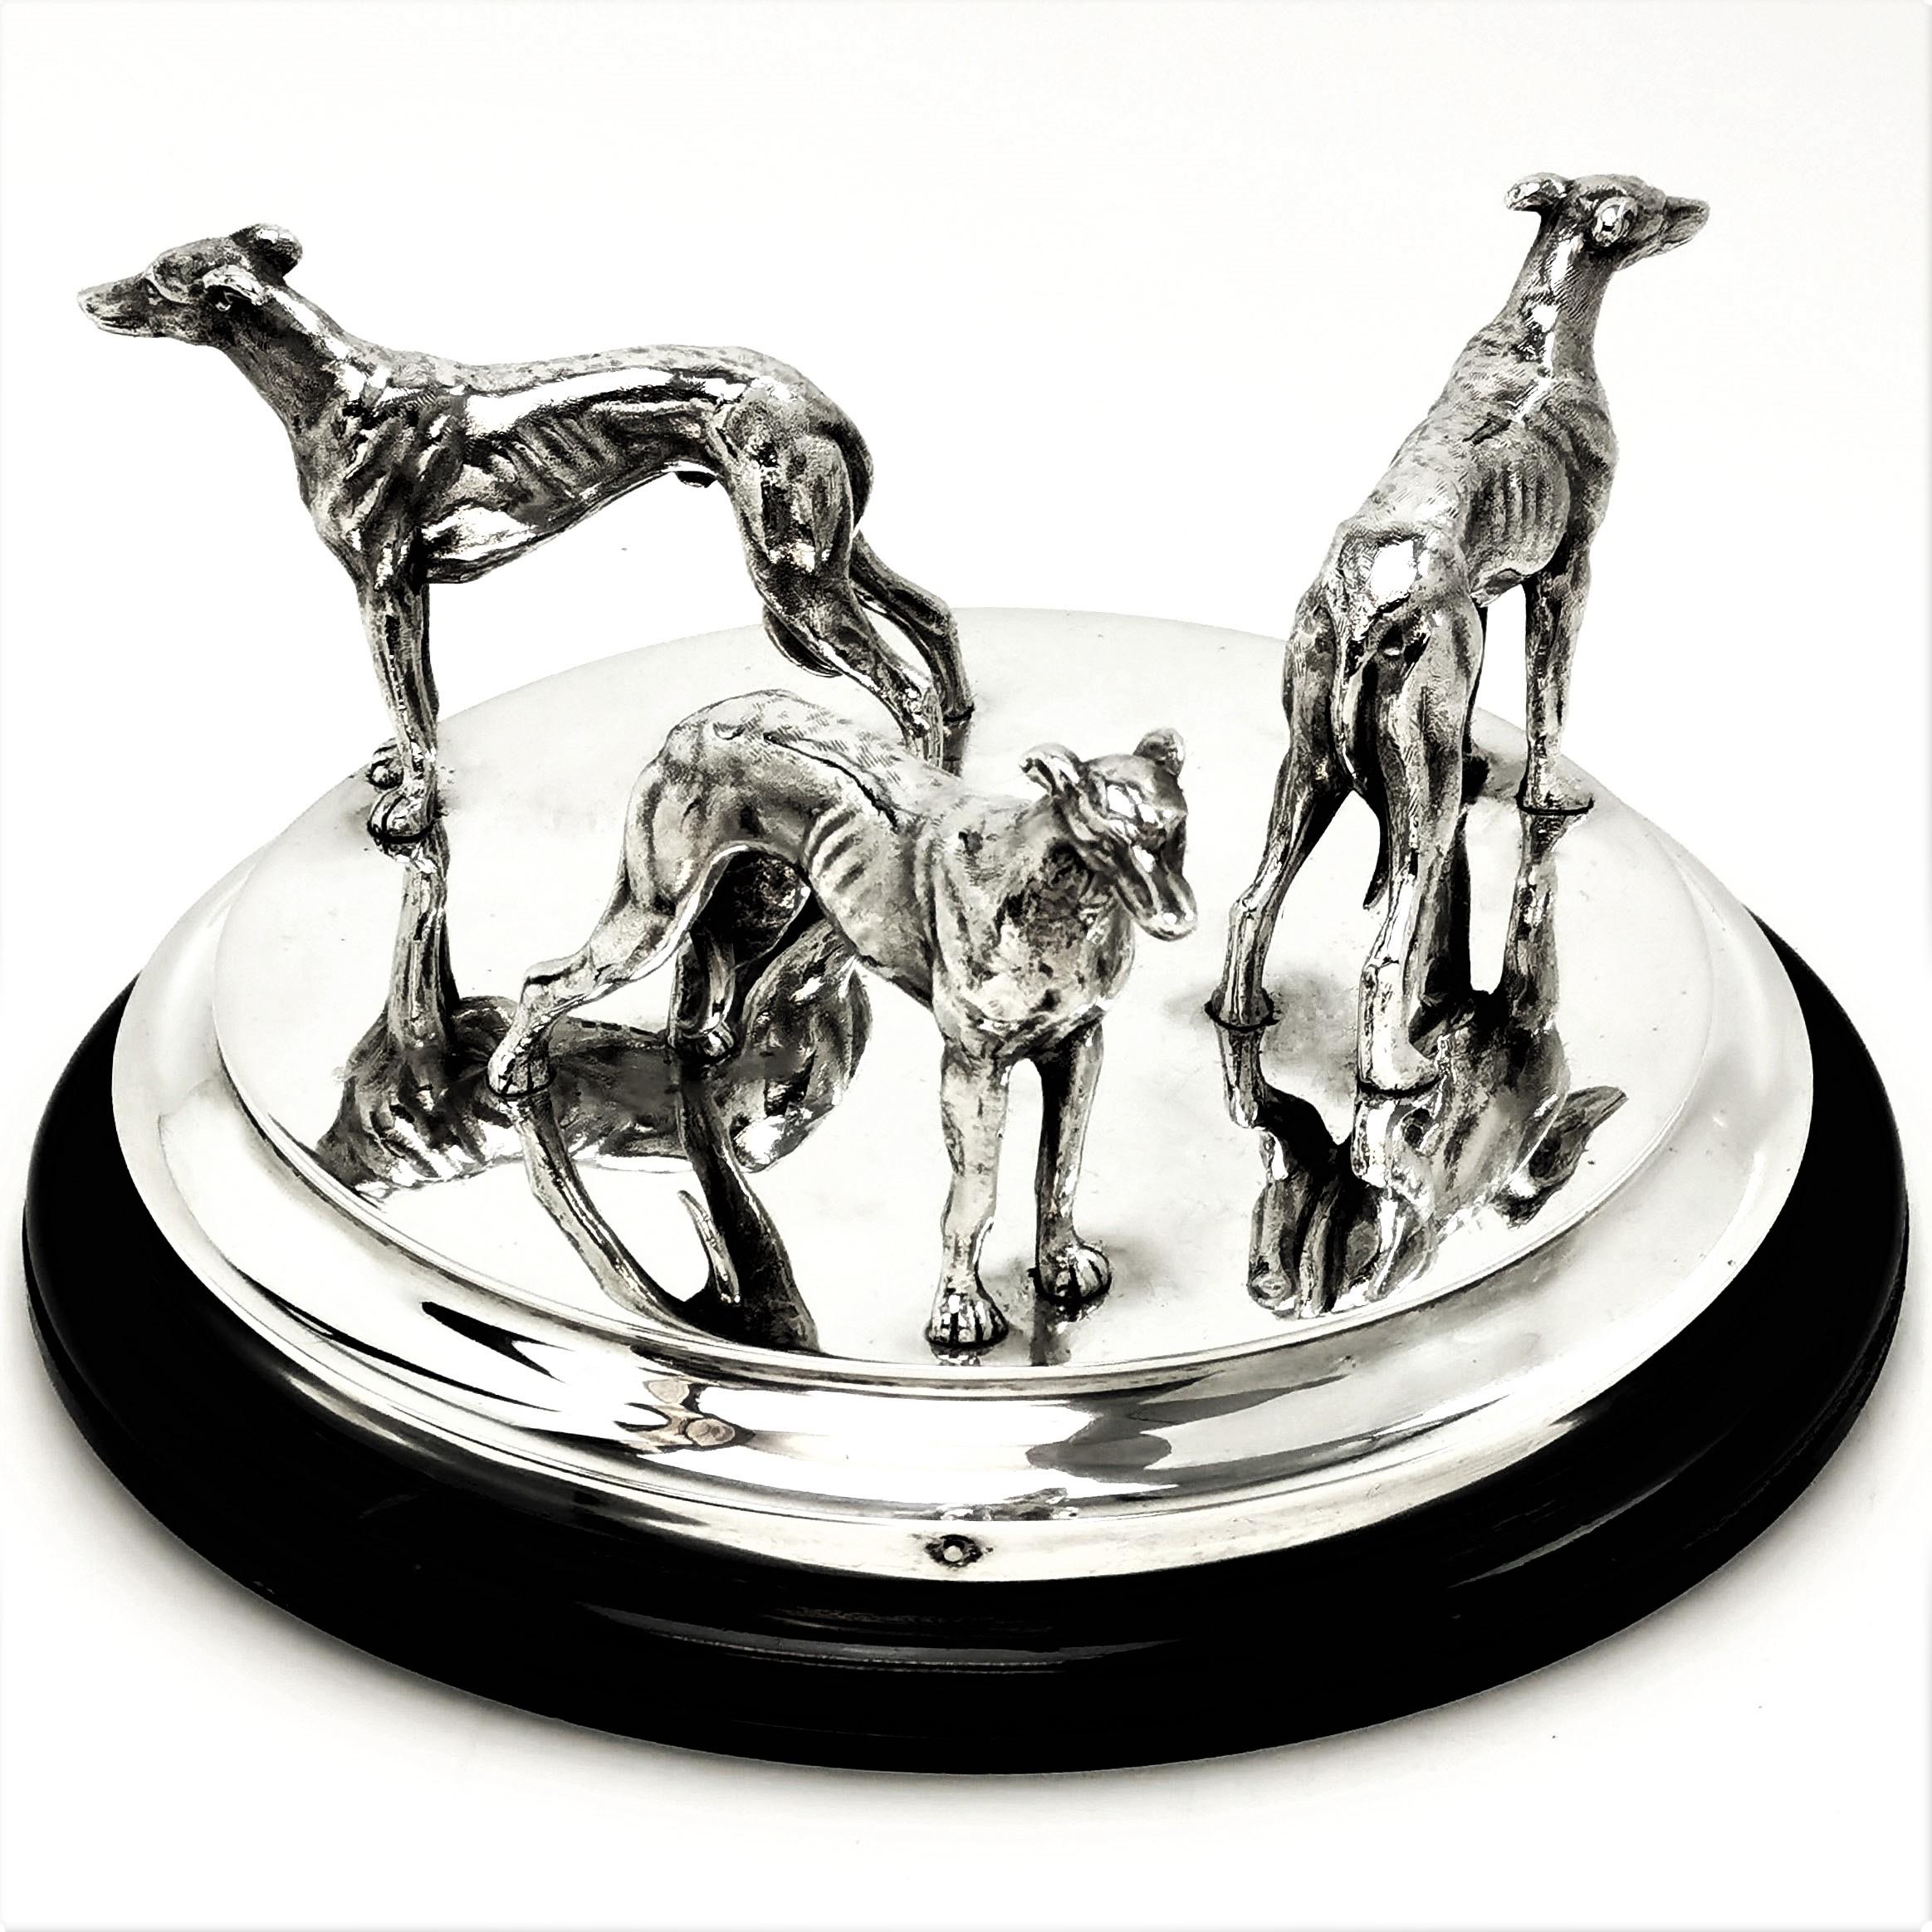 A gorgeous vintage solid Silver Model of three Greyhounds standing on a circular silver base on a black circular plinth. Each Greyhound Faces outward in different directions making a lovely sculpture from any angle.

Made in London in 1837 by